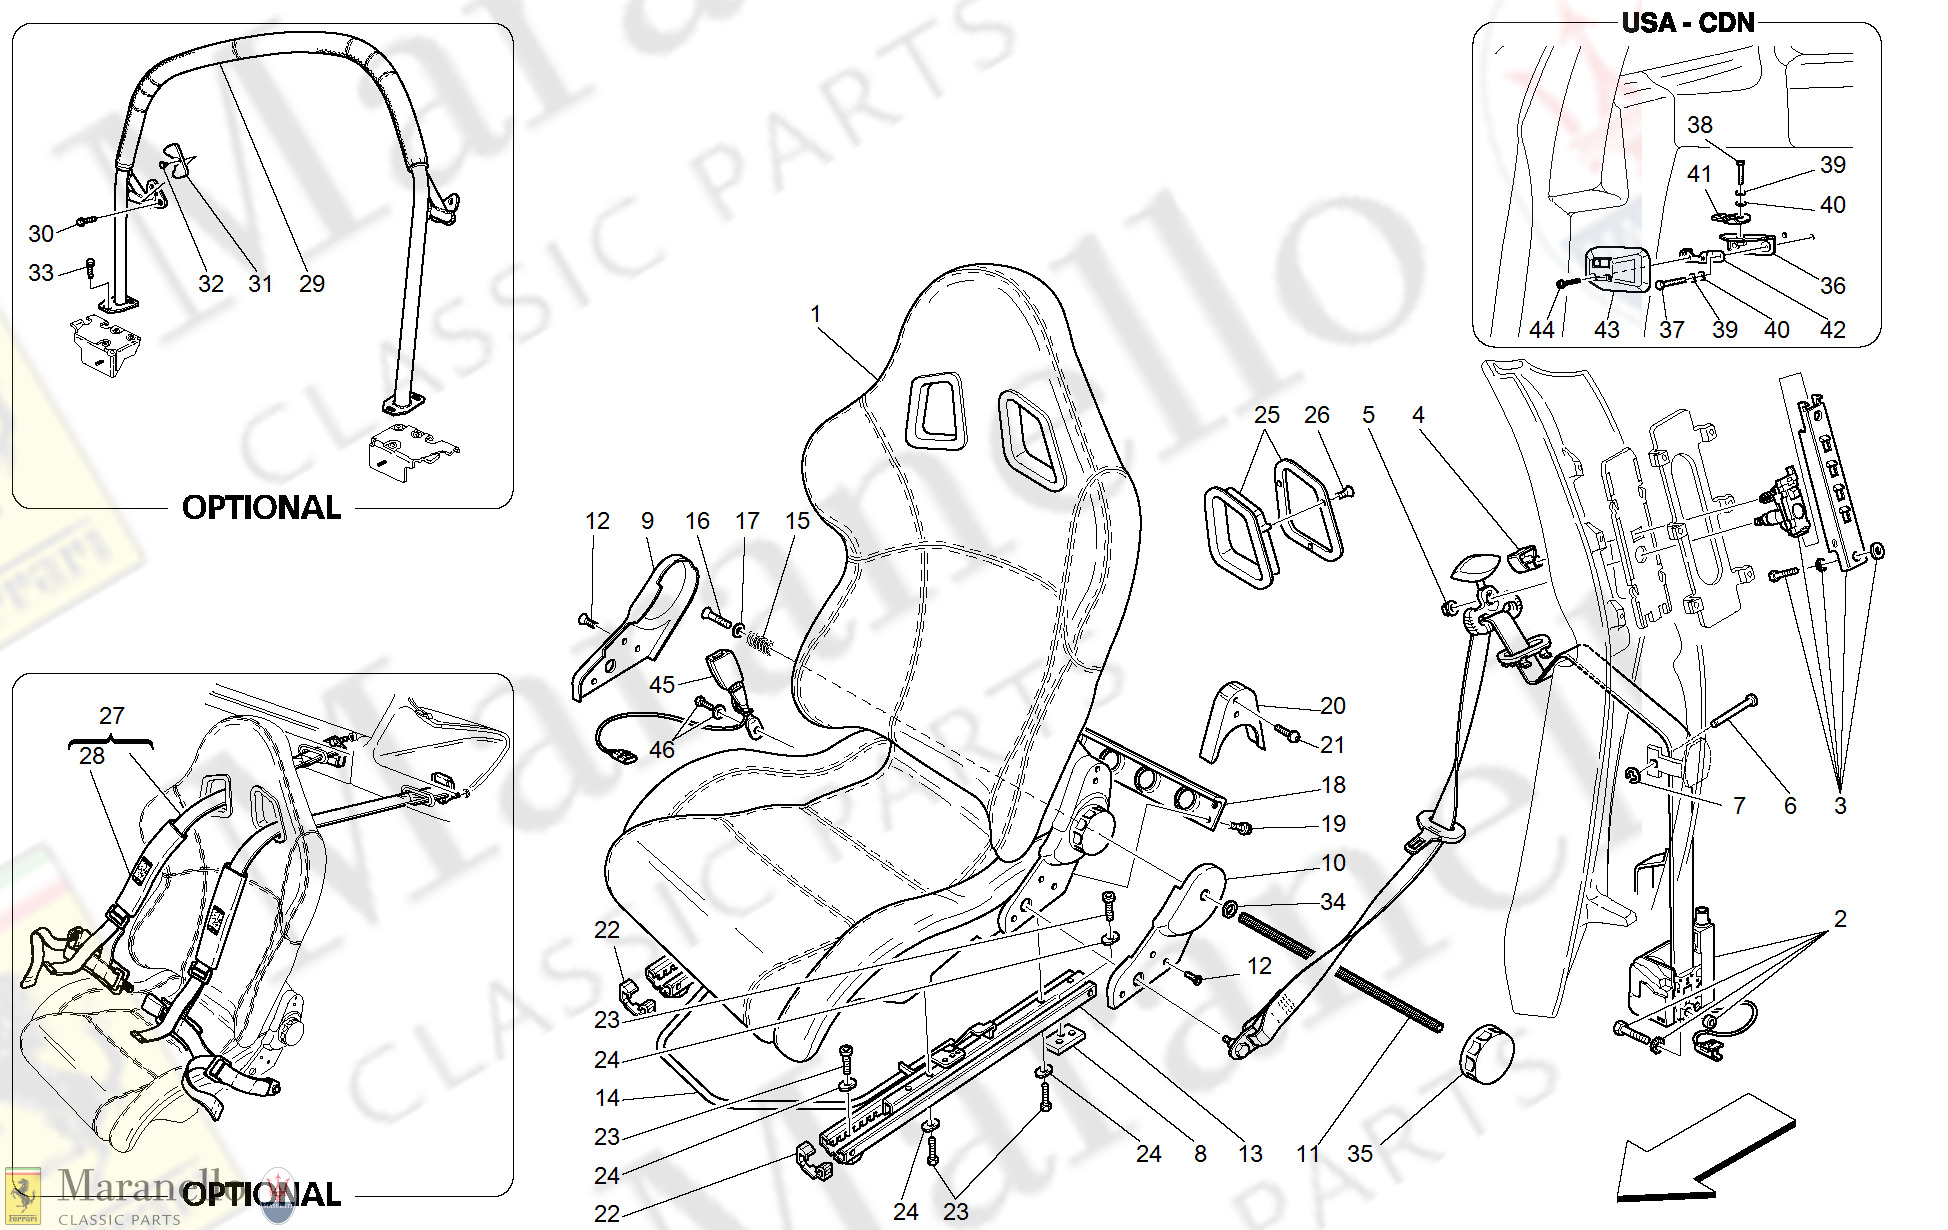 121 - Racing Seat-Safety Belts-Roll Bar